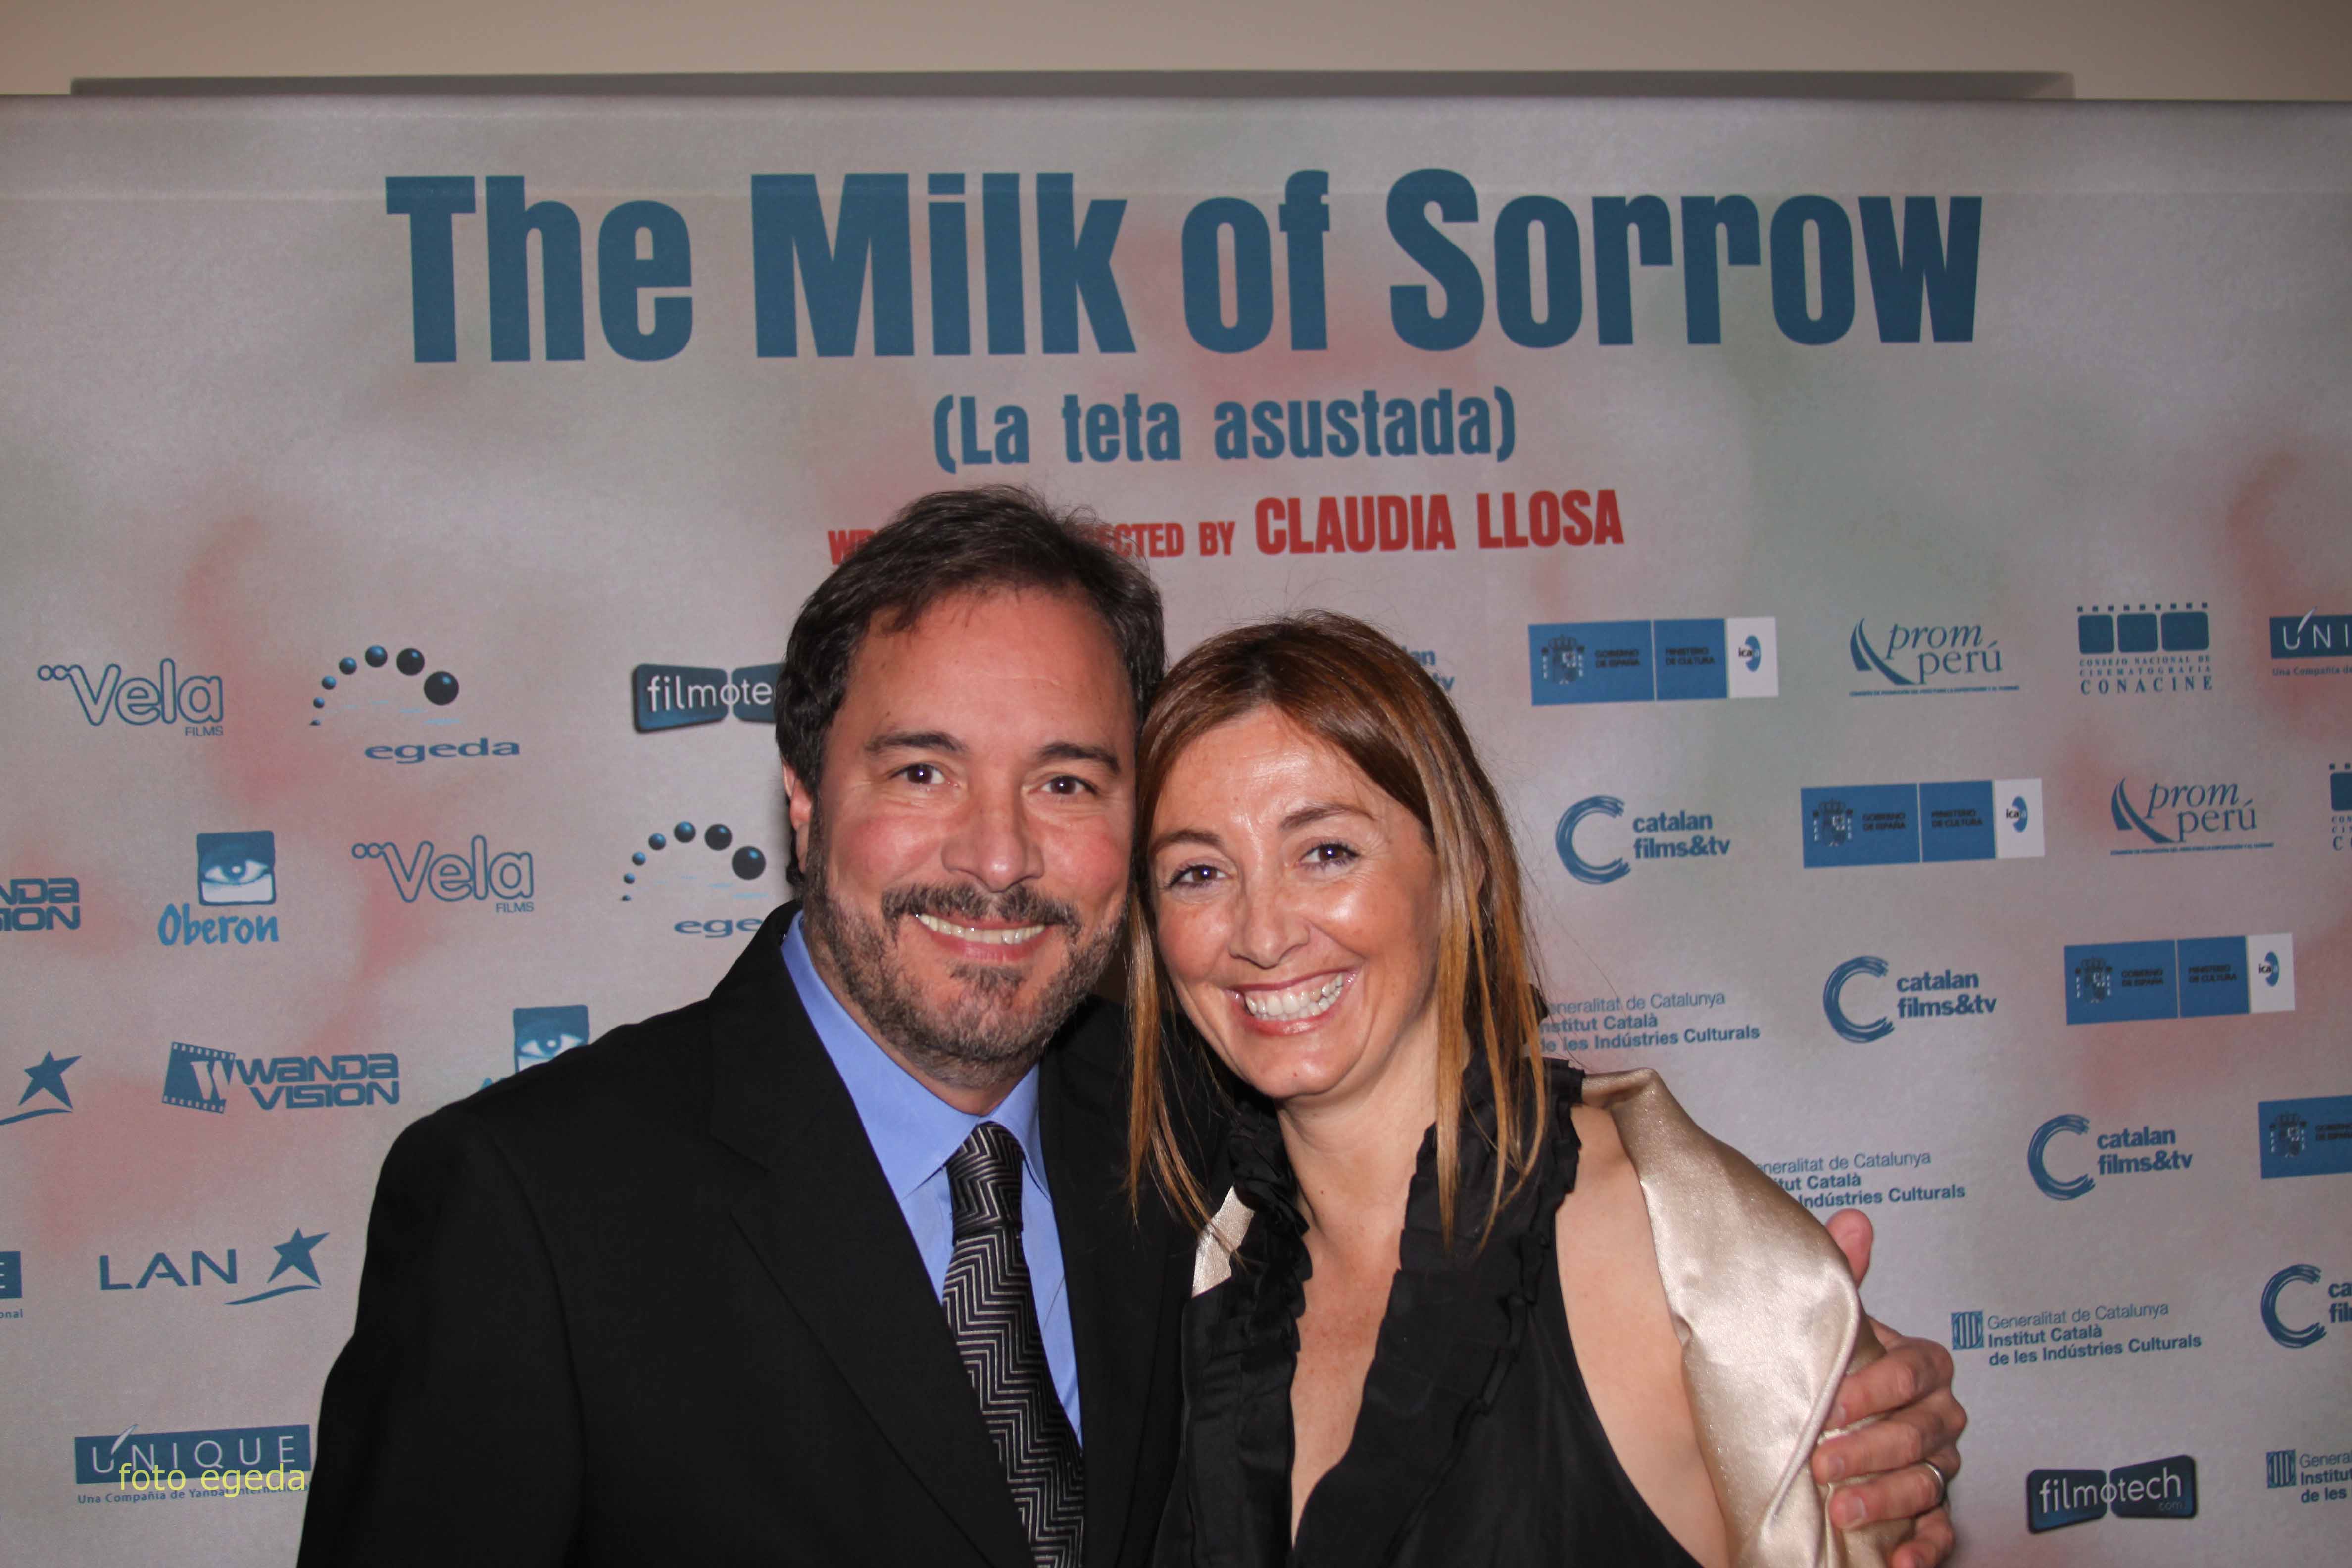 Manuel Espinosa at the post-Oscar party for the film Milk of Sorrow.